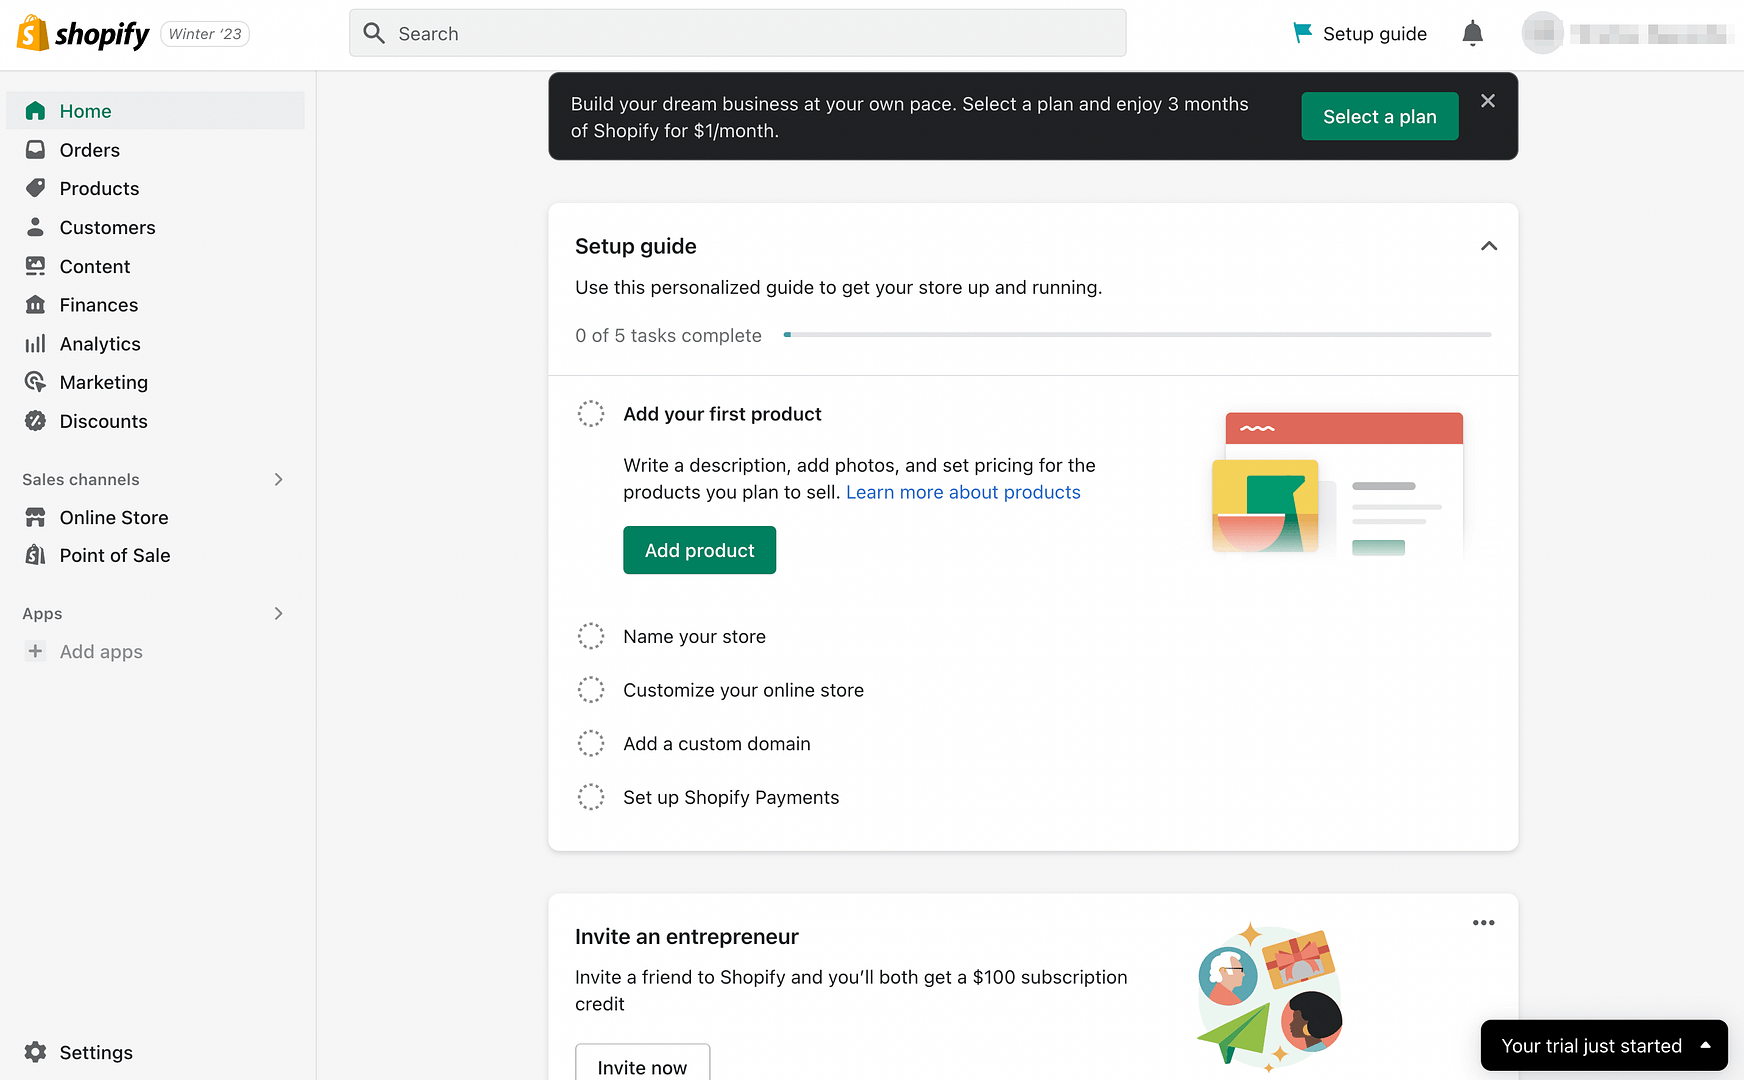 The Shopify dashboard with the Startup Guide checklist visible